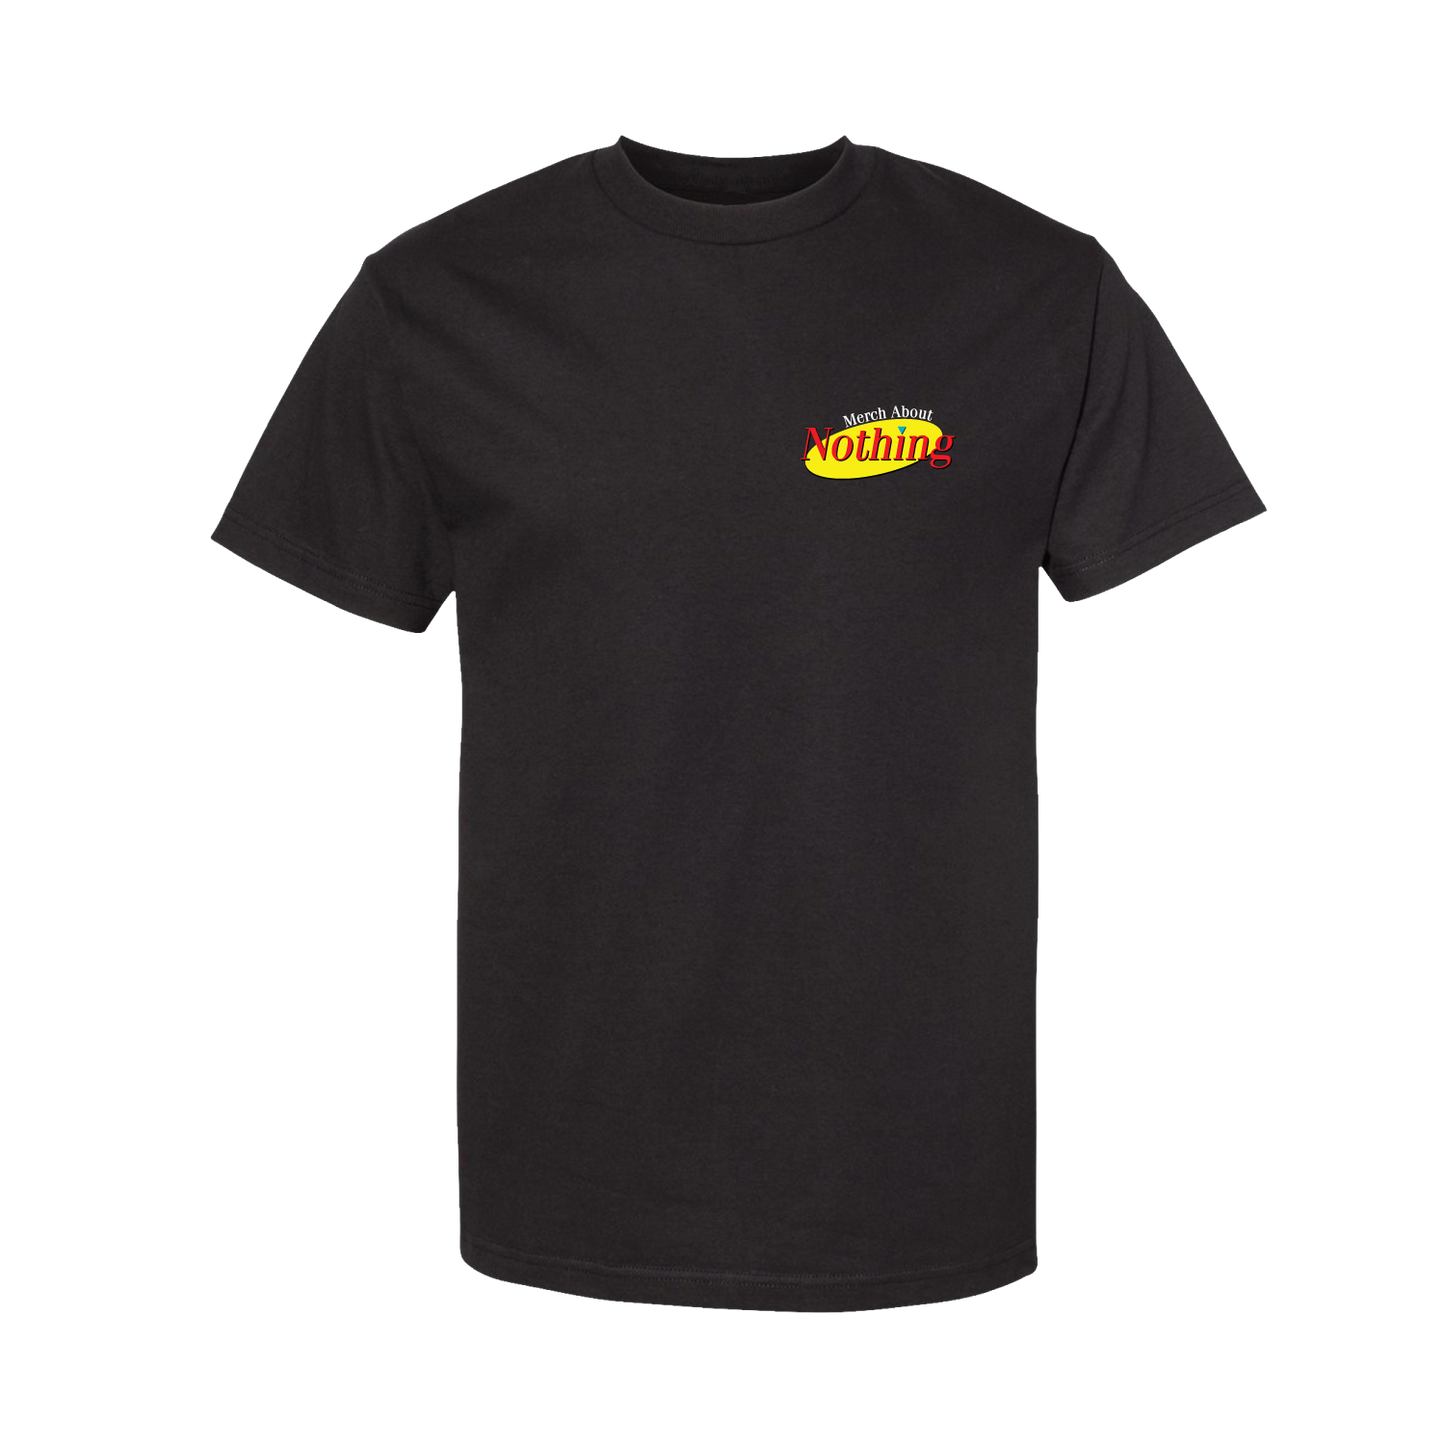 Wale - Merch About Nothing T-Shirt